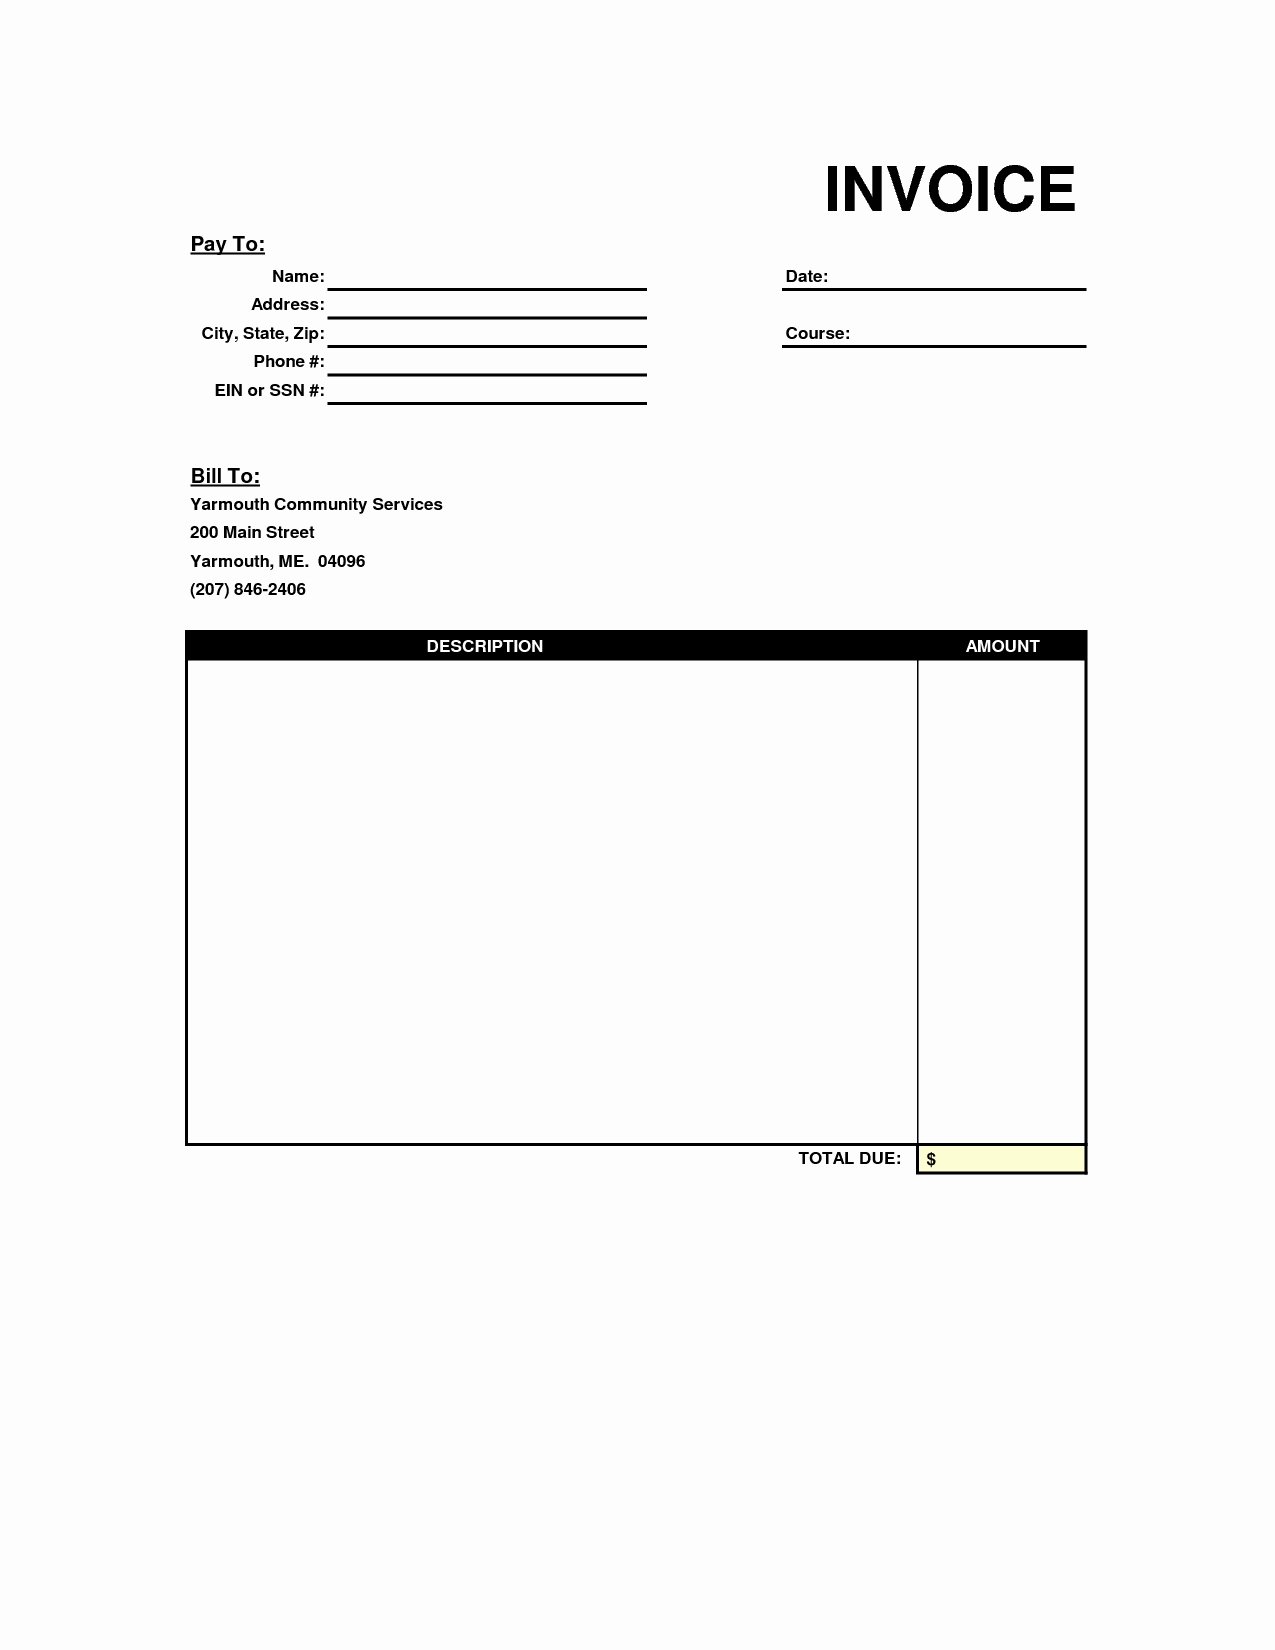 Invoice and Receipt Template Fresh Sales Invoice Receipt Invoice Template Ideas